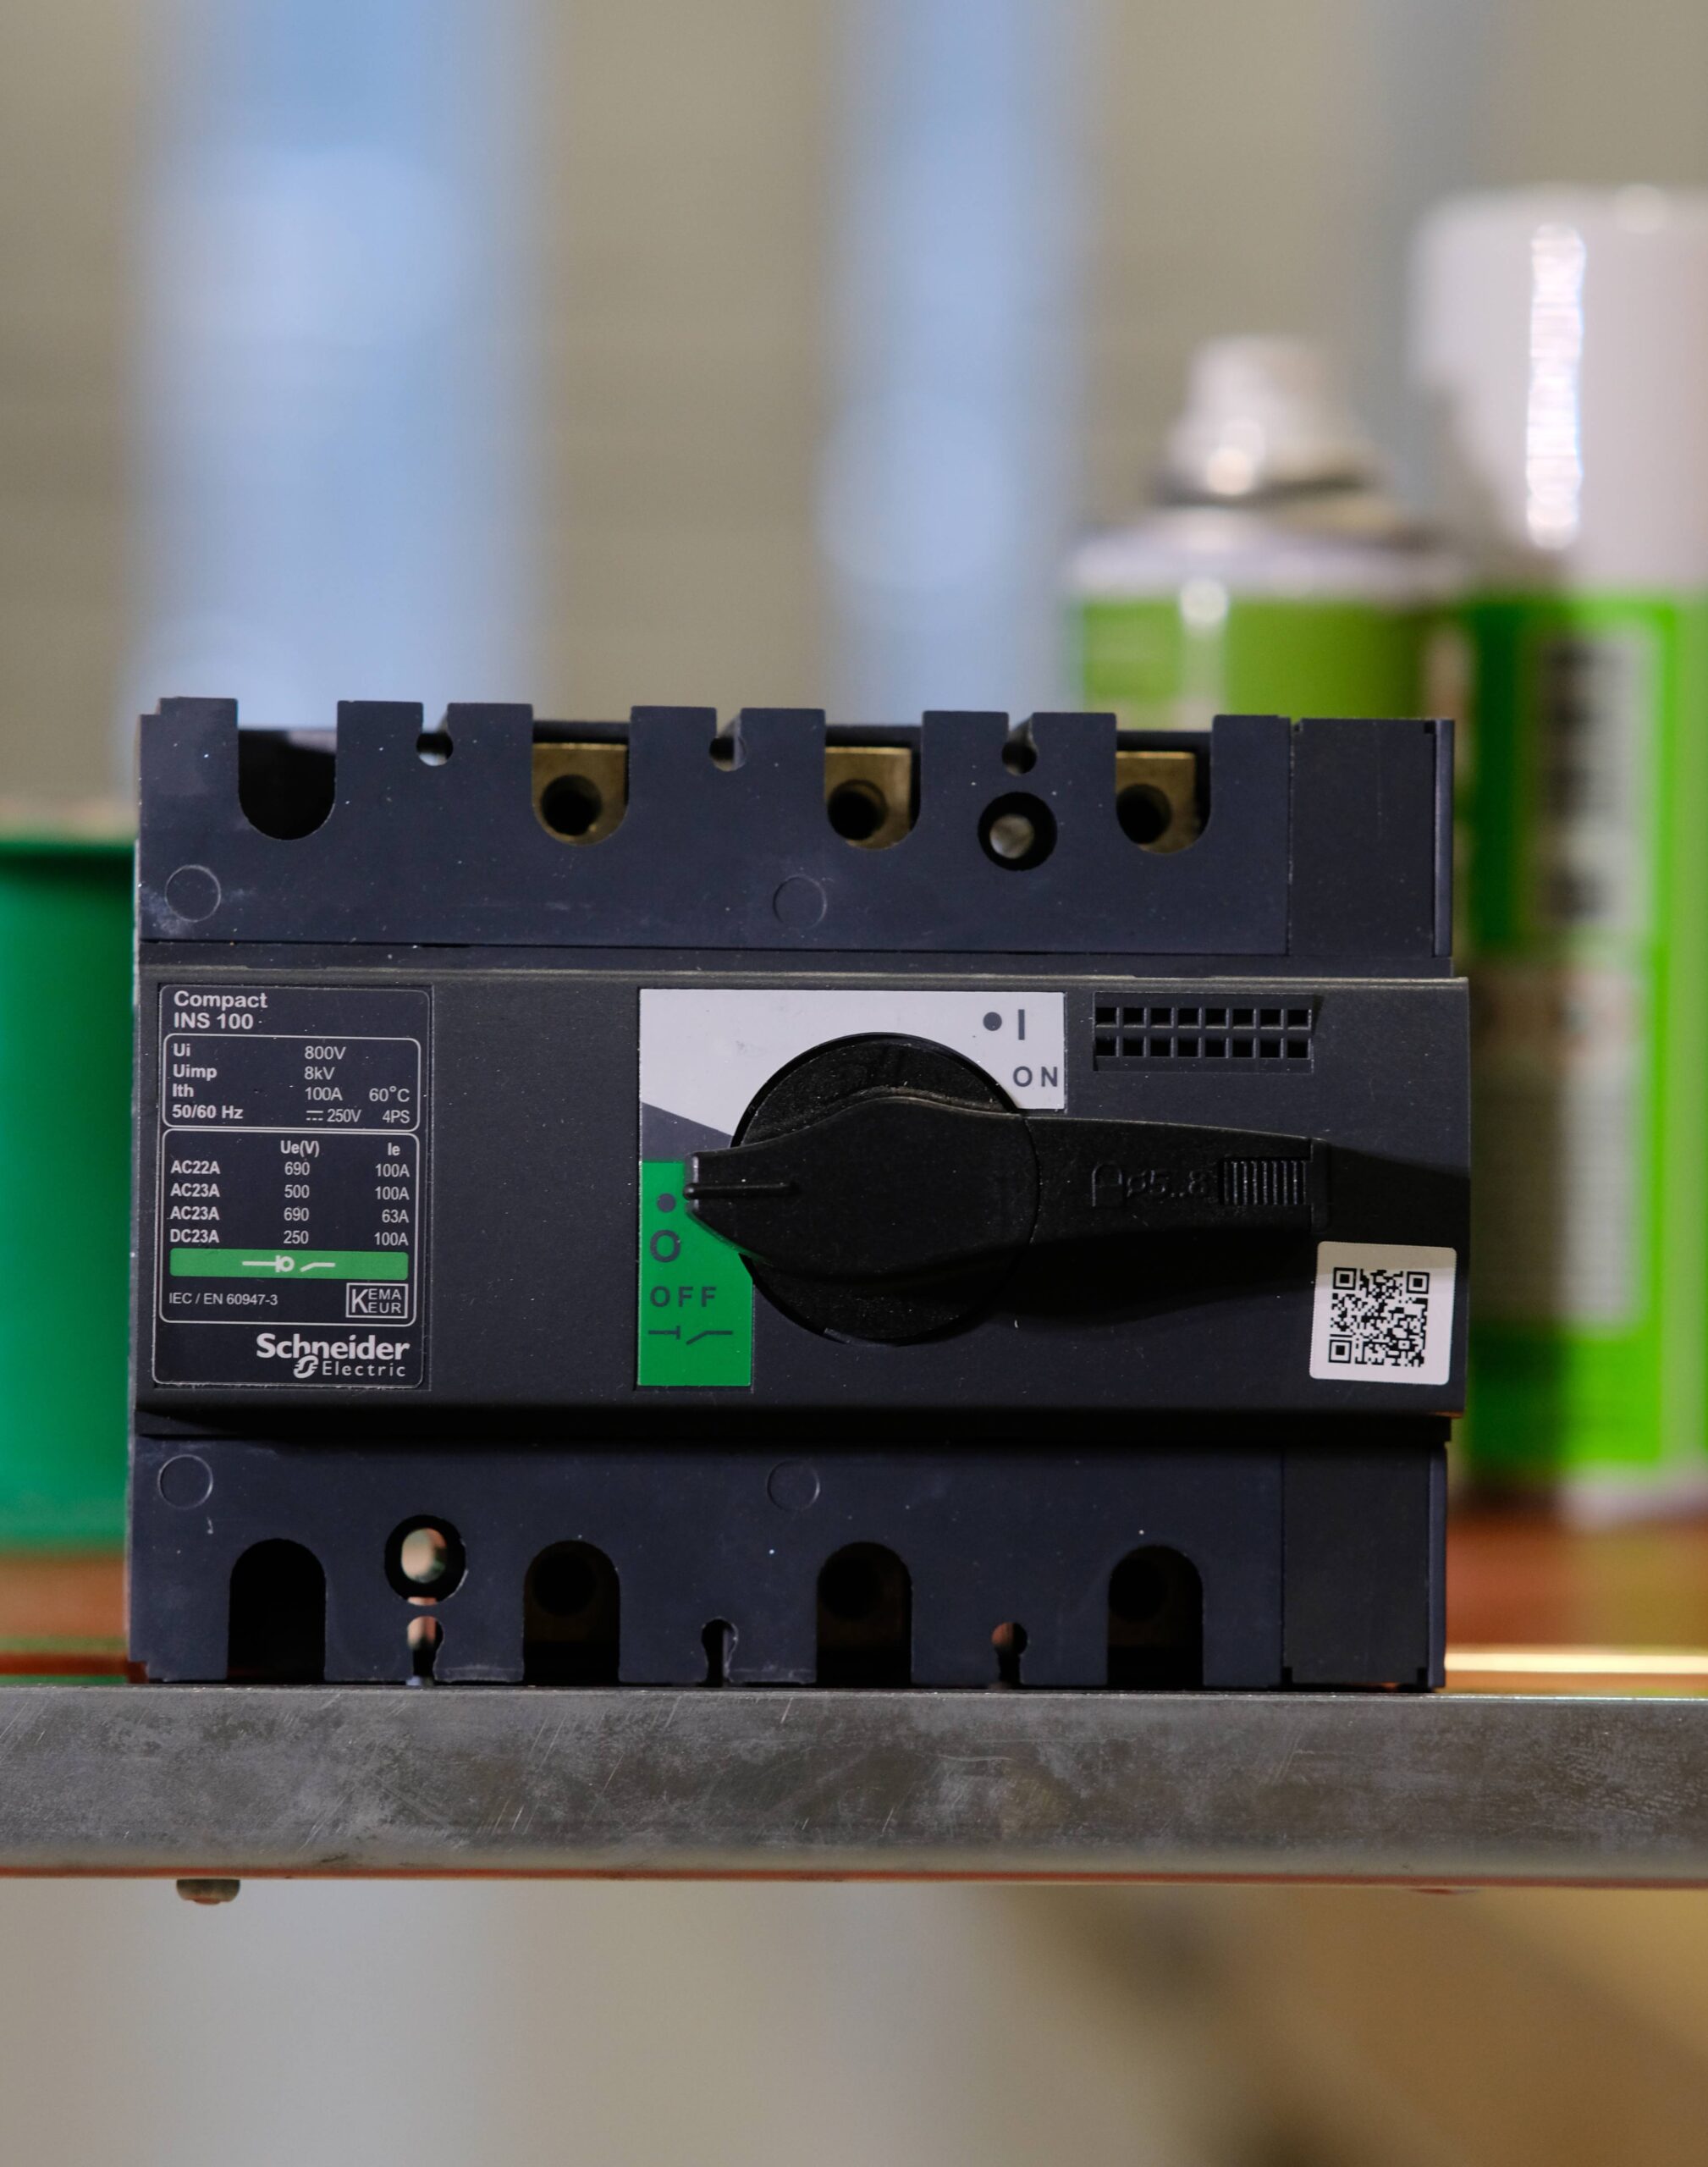 photograph of a Schneider circuit breaker with blurry background.